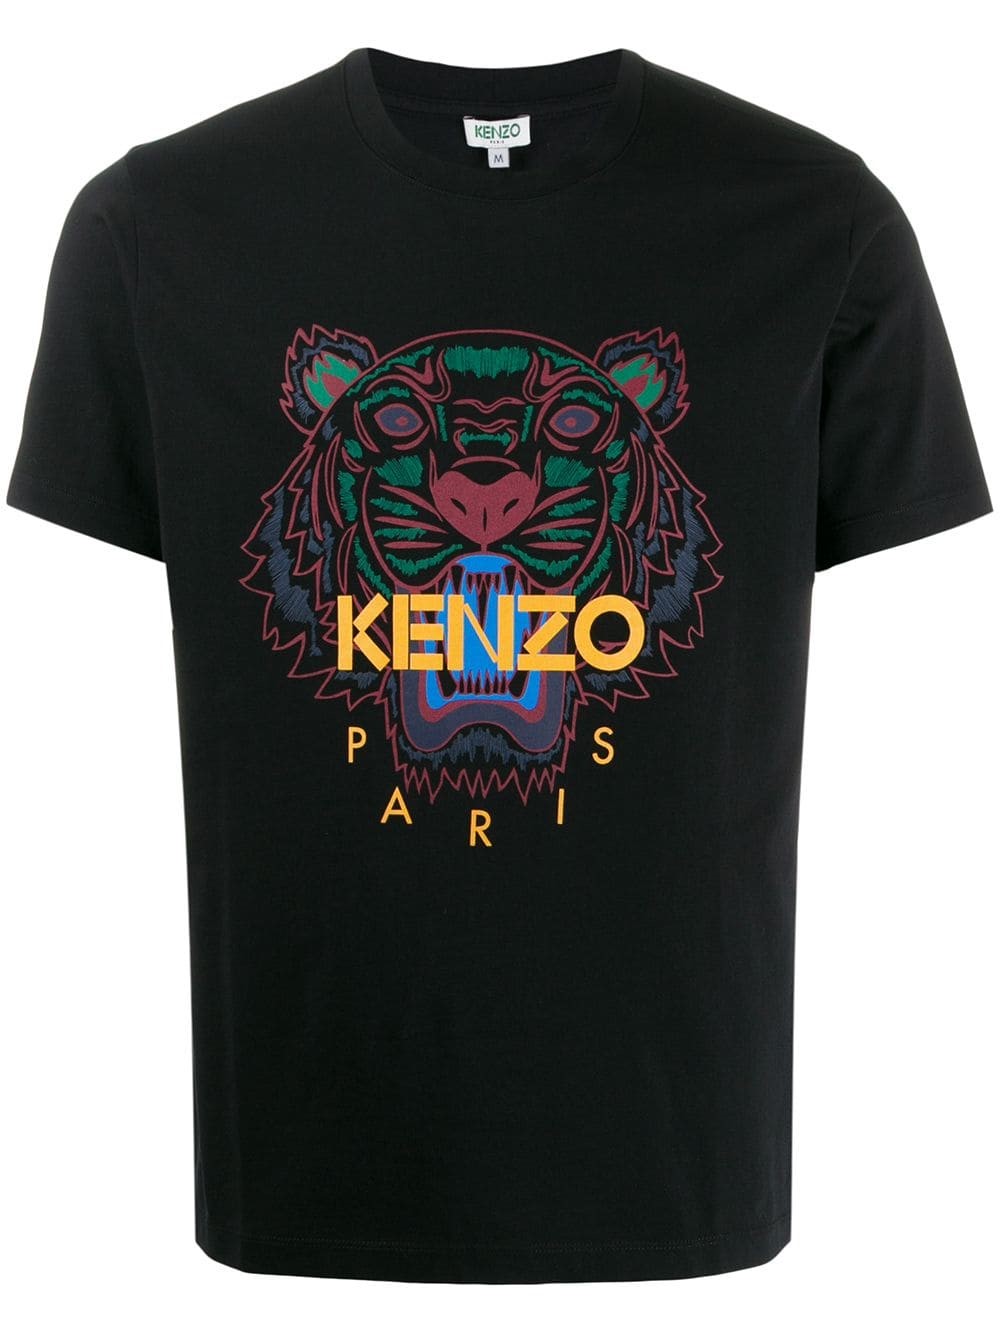 kenzo TIGER T-SHIRT available on montiboutique.com - 30313